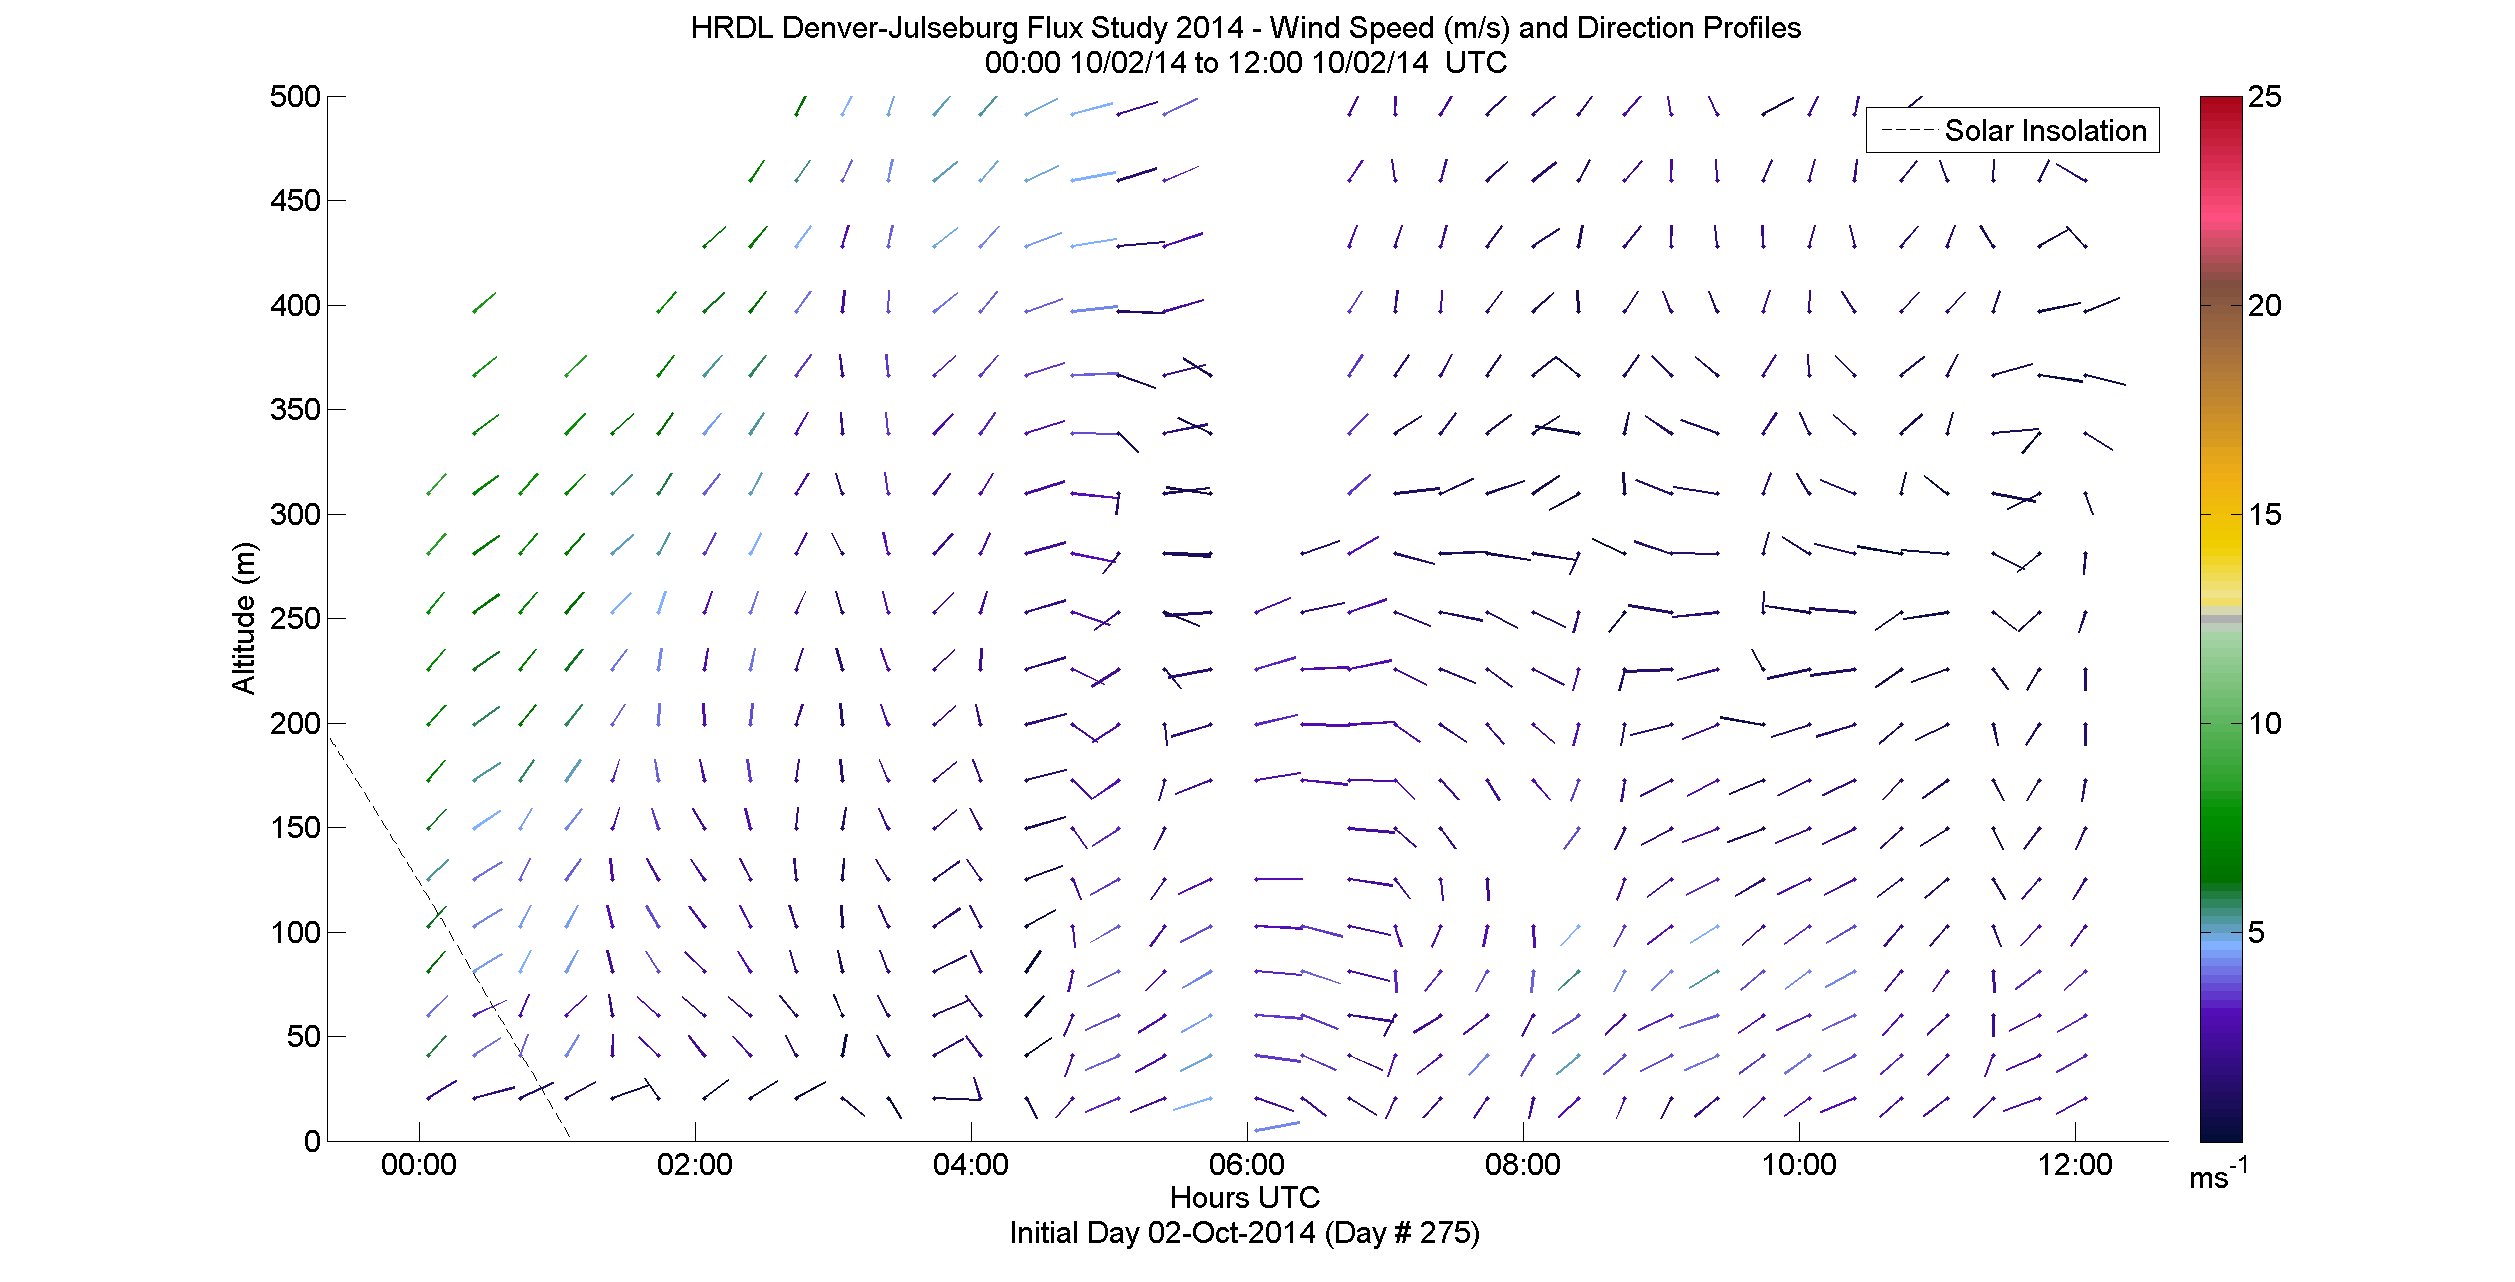 HRDL speed and direction profile - October 2 am